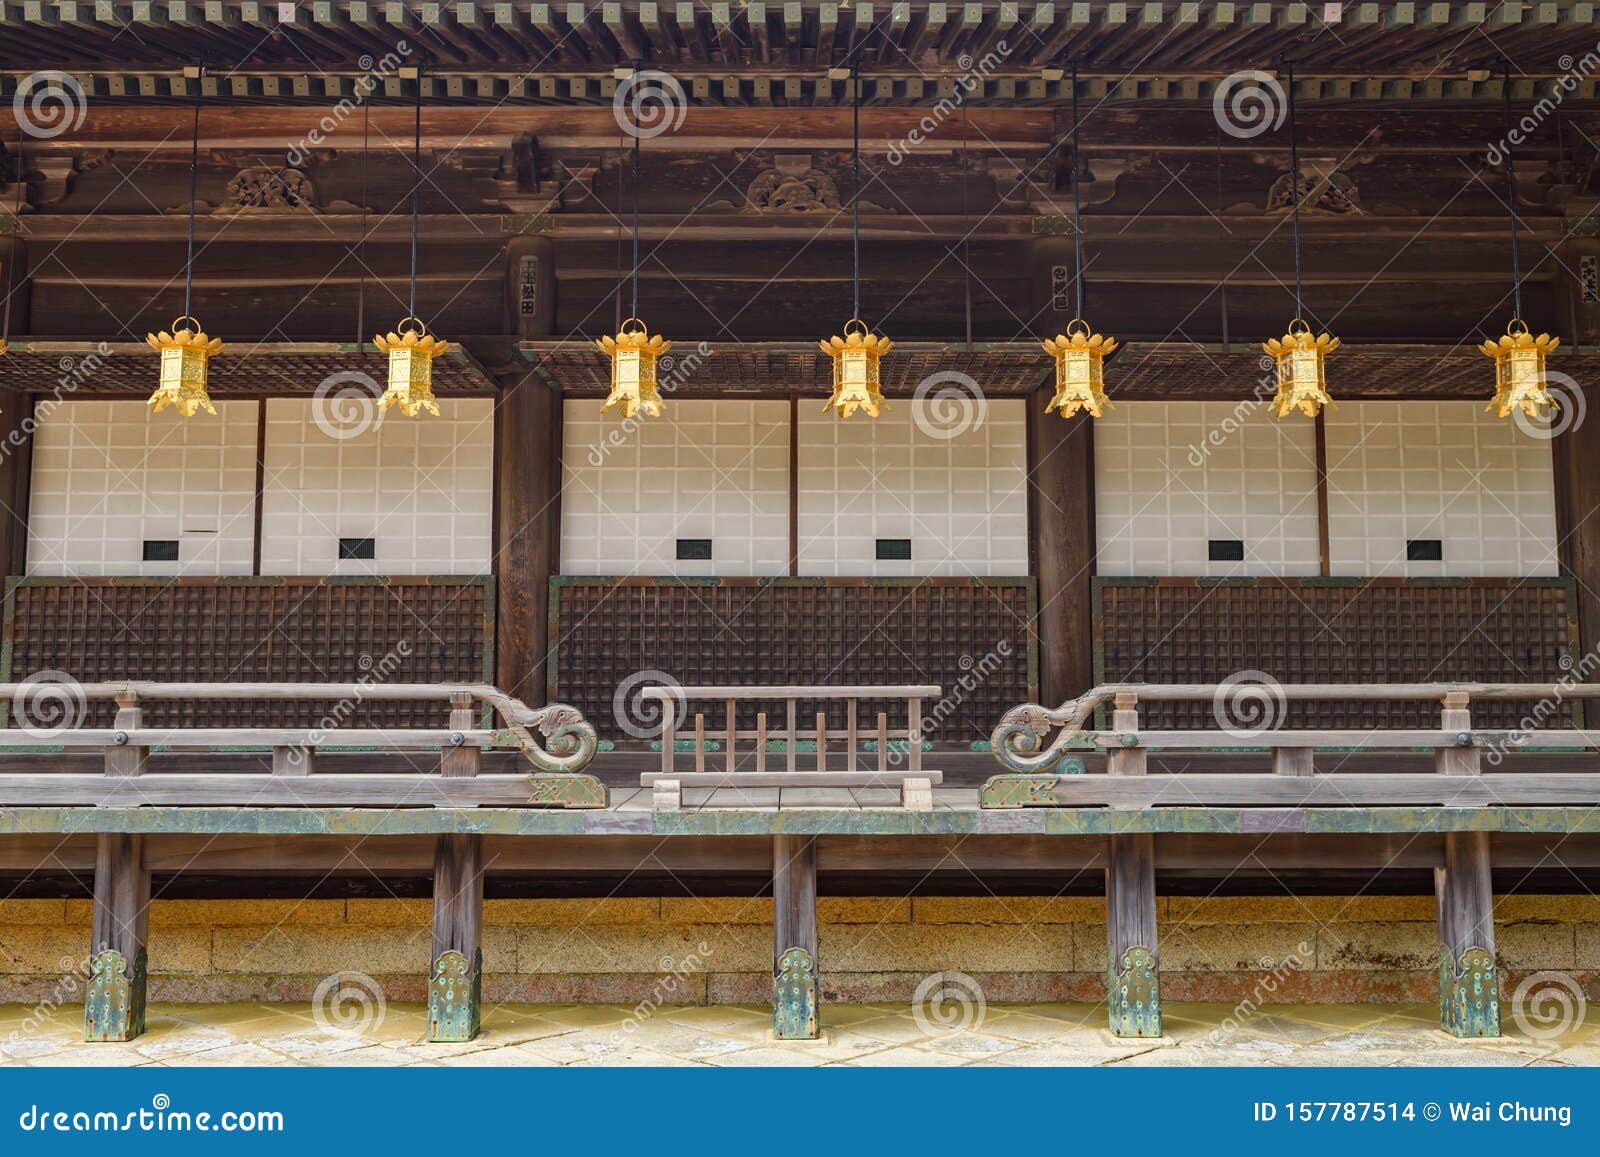 gold lanterns hanging from temple building